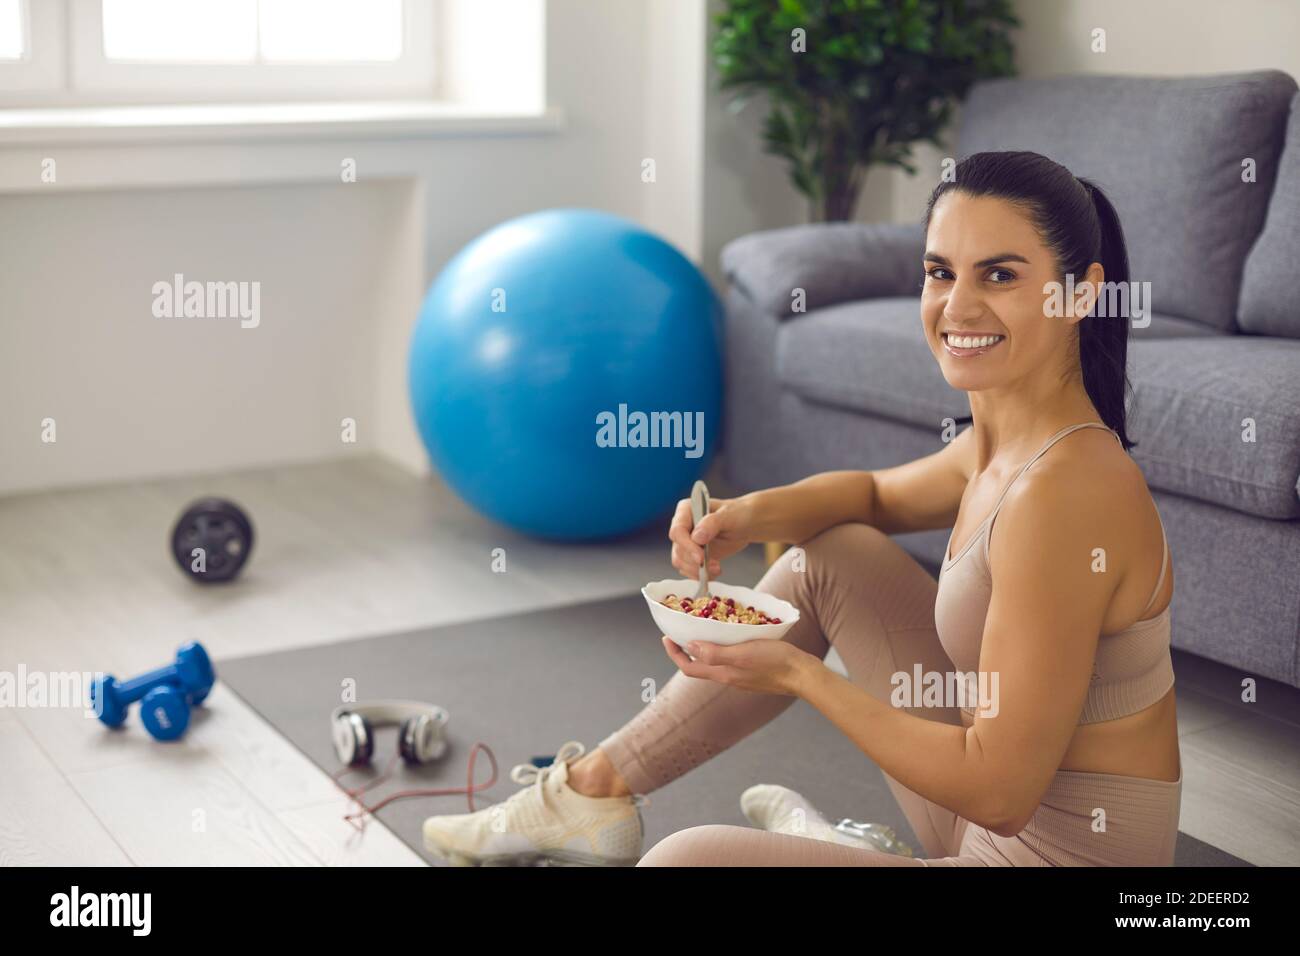 Woman sitting on sports mat and smiling at camera while enjoying healthy meal after workout Stock Photo